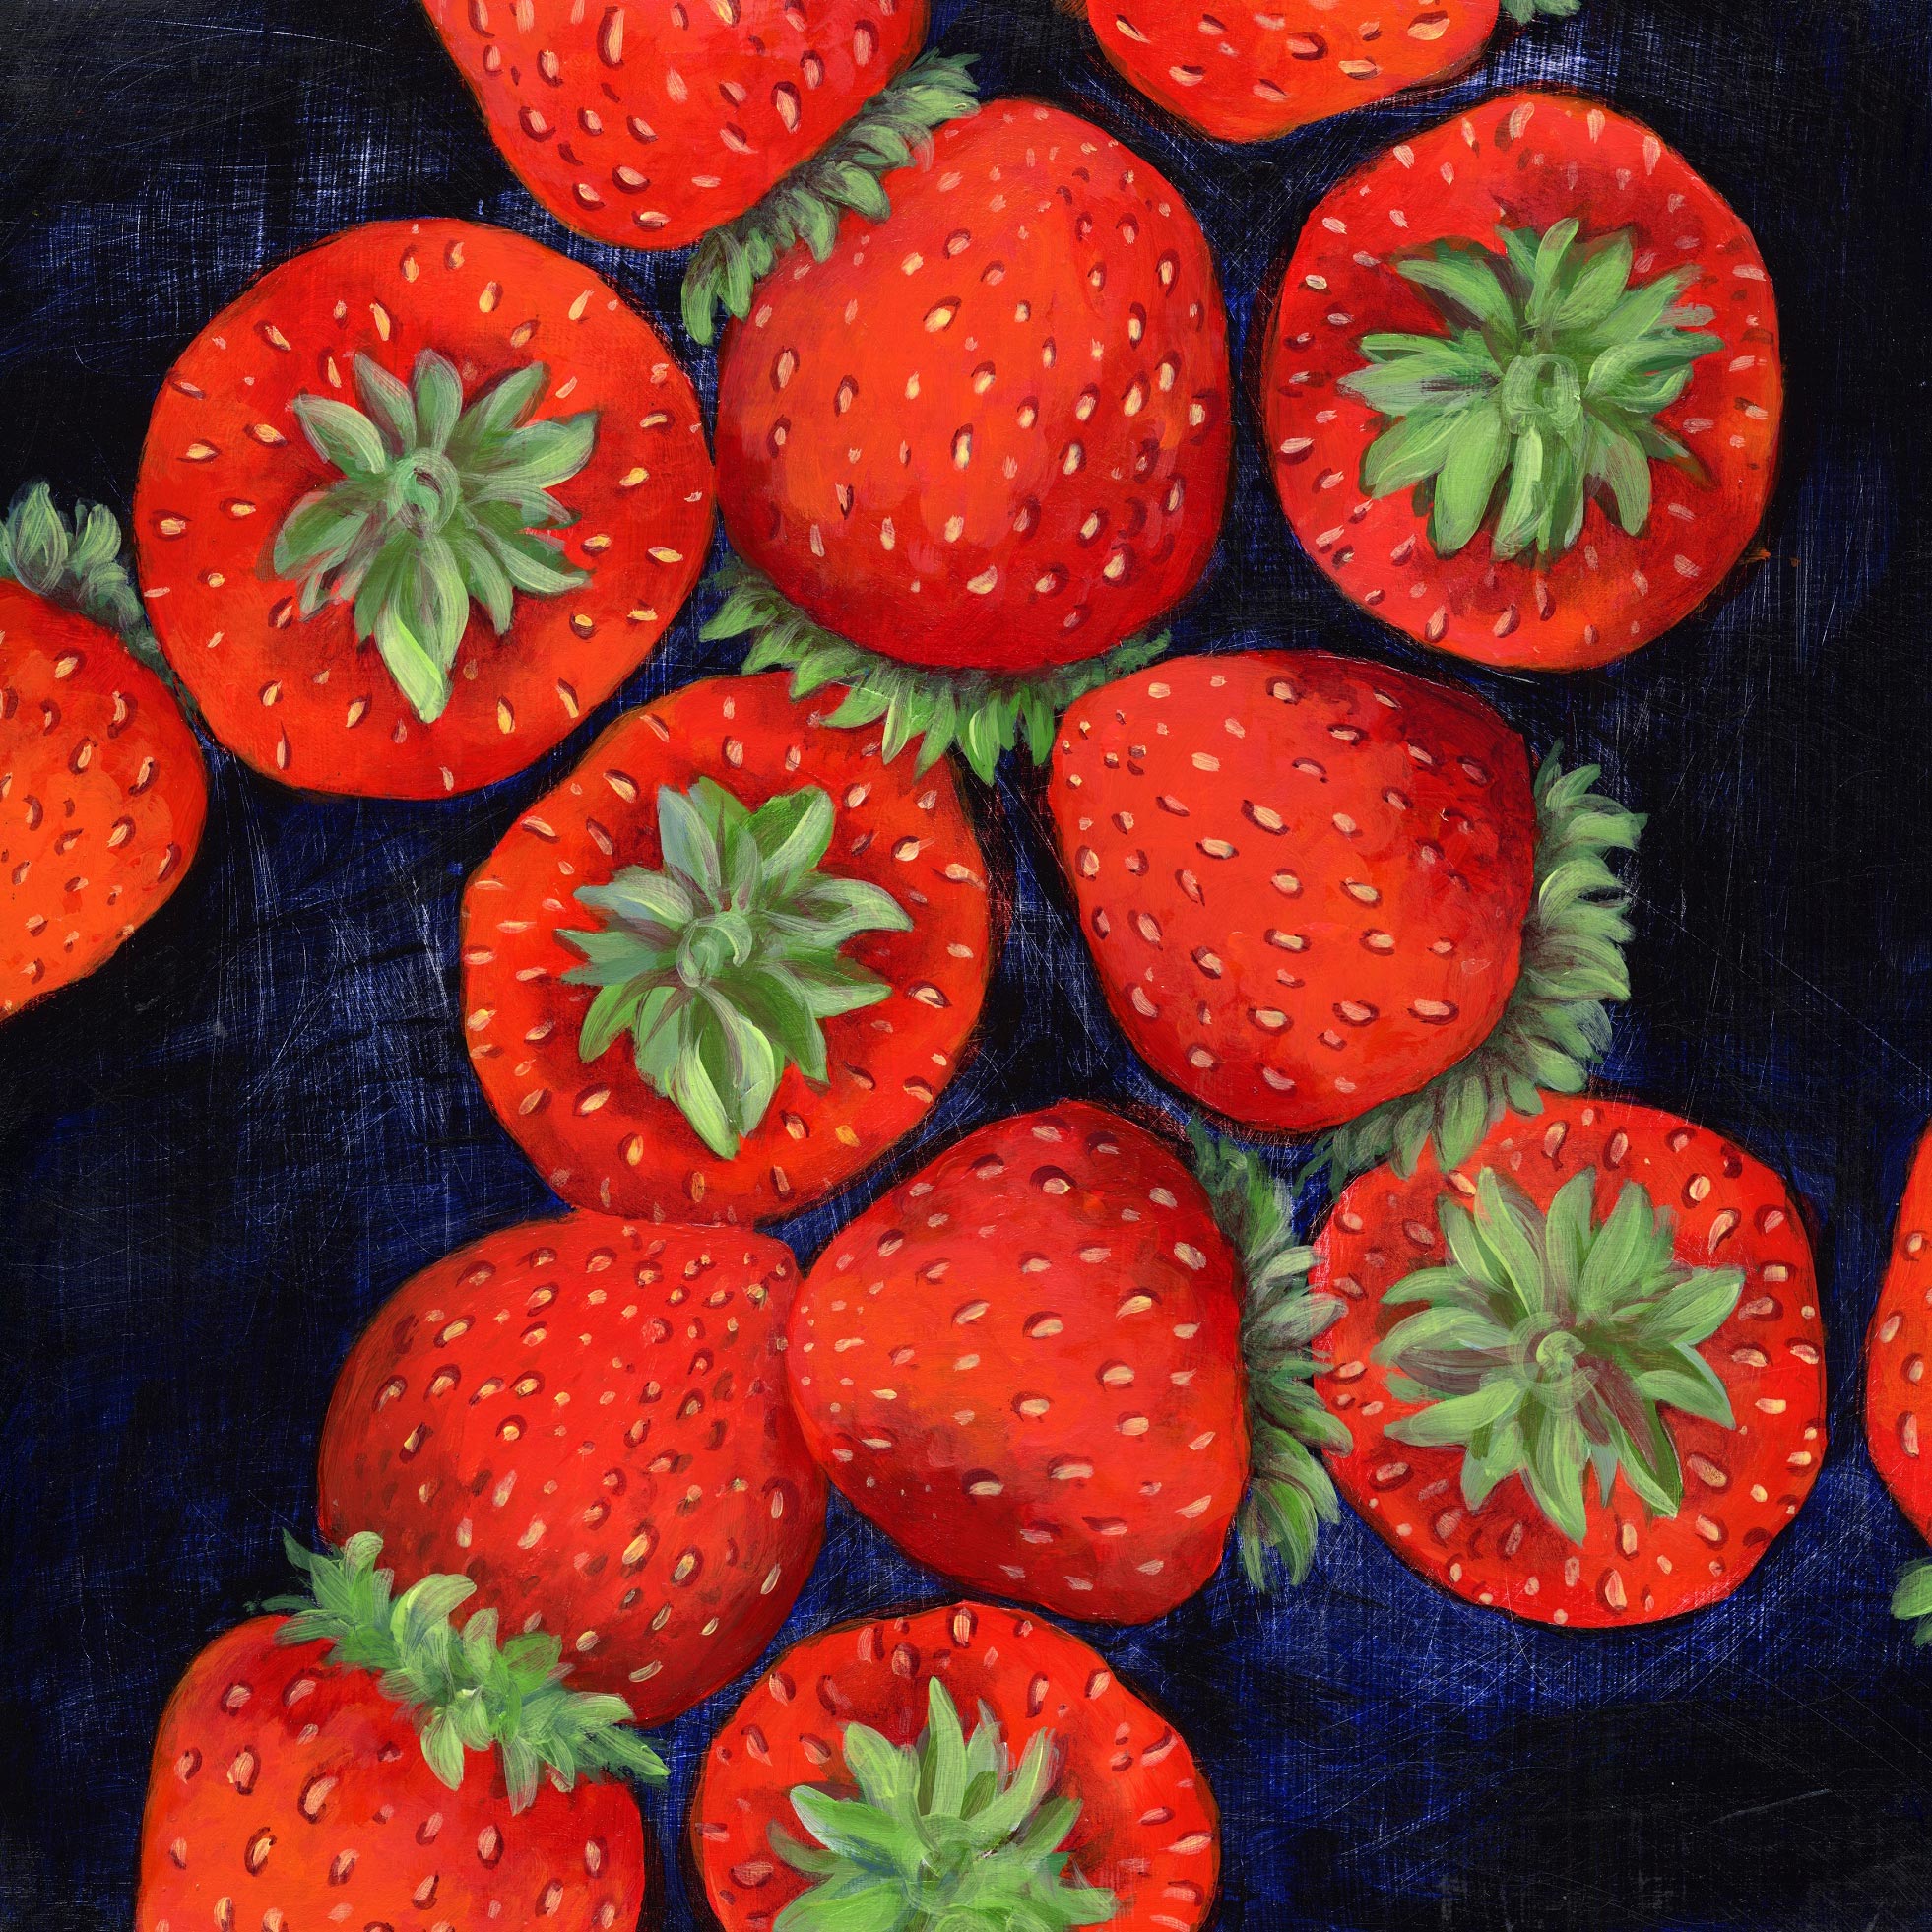 Strawberries | Humboldt County Office of Education